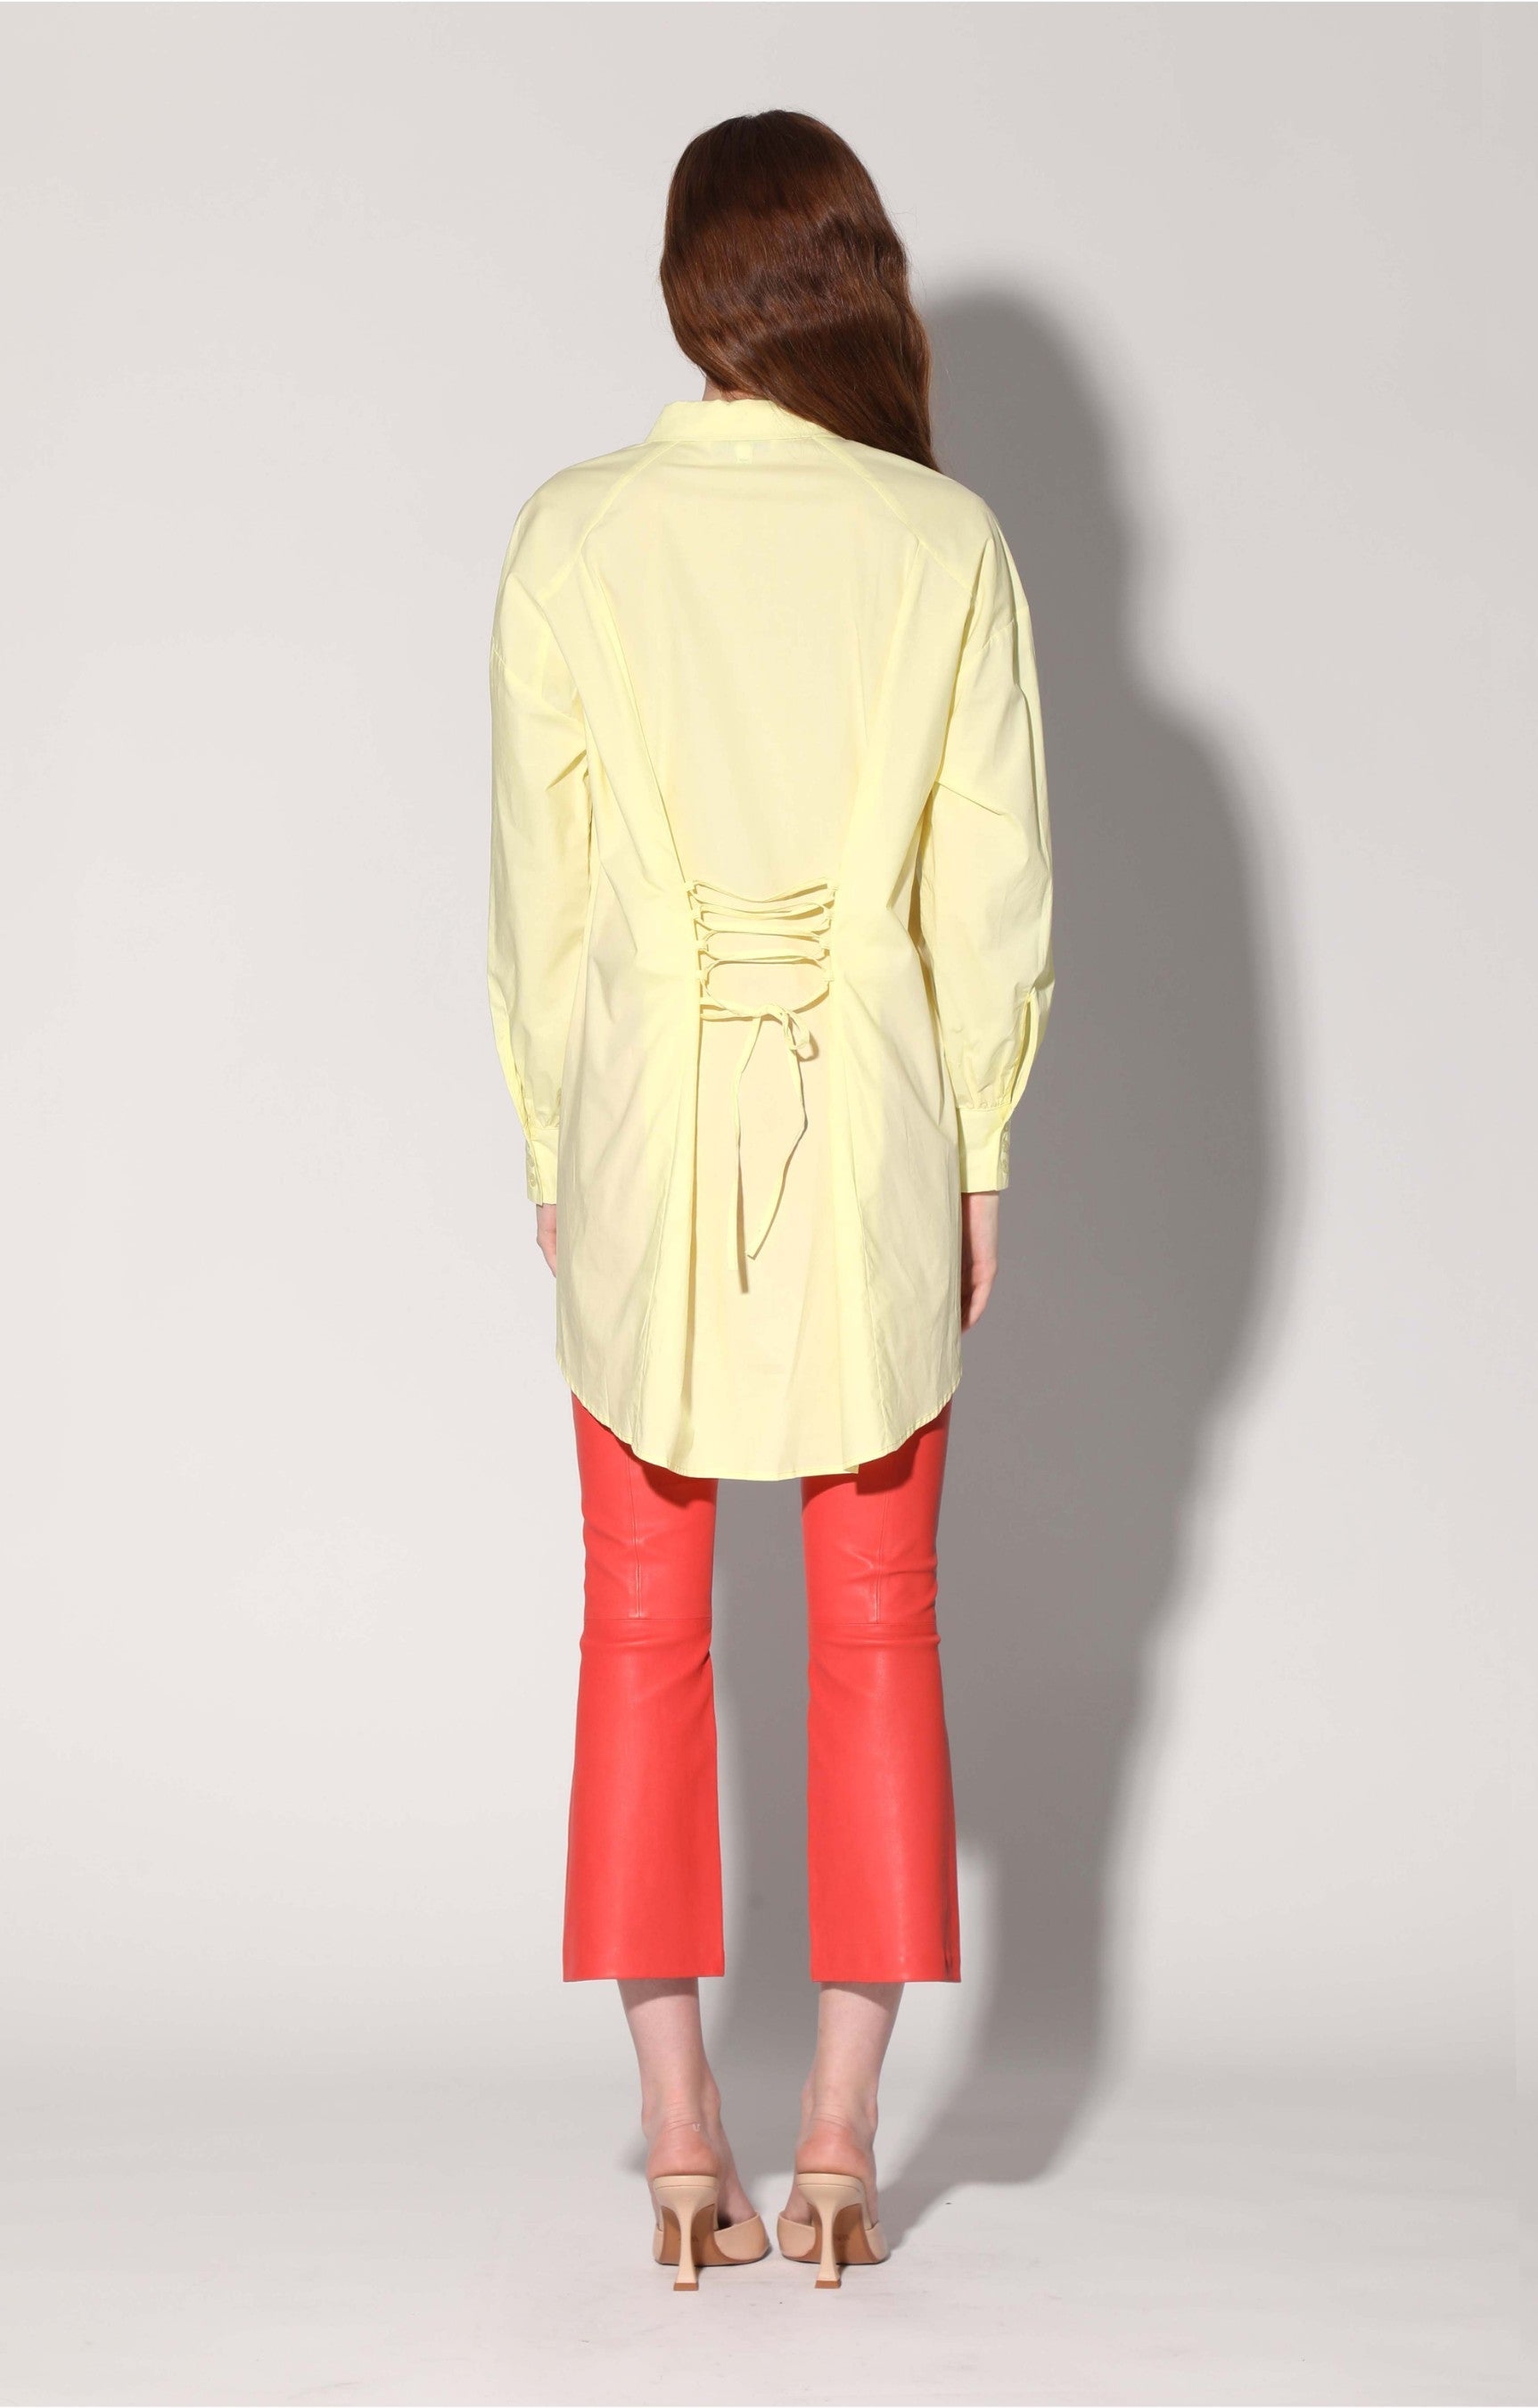 Vincenza Top, Limoncello by Walter Baker